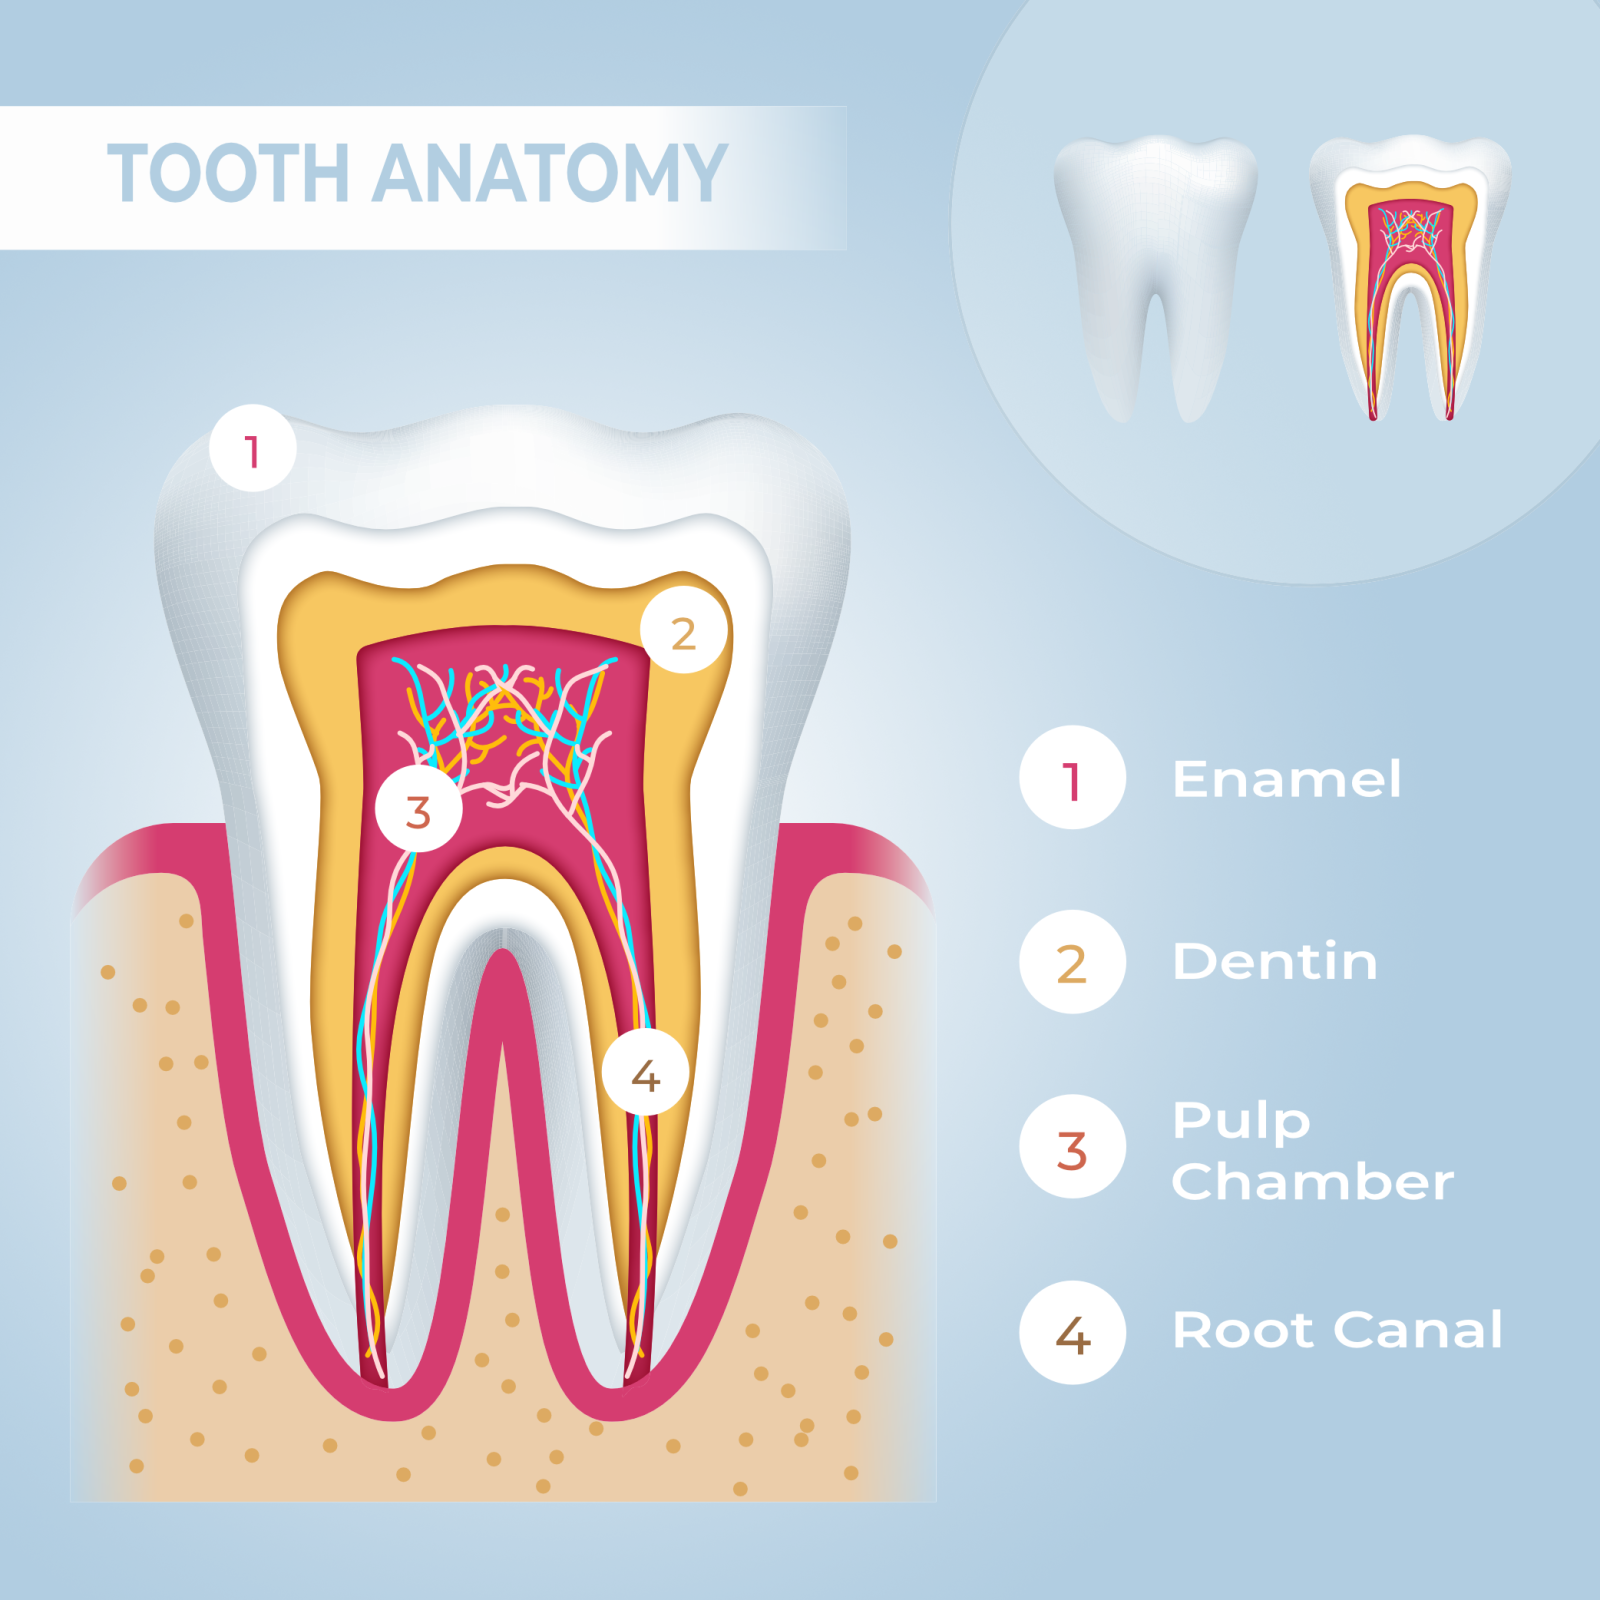 anatomy of a tooth: enamel, dentin, pulp chamber, root canal